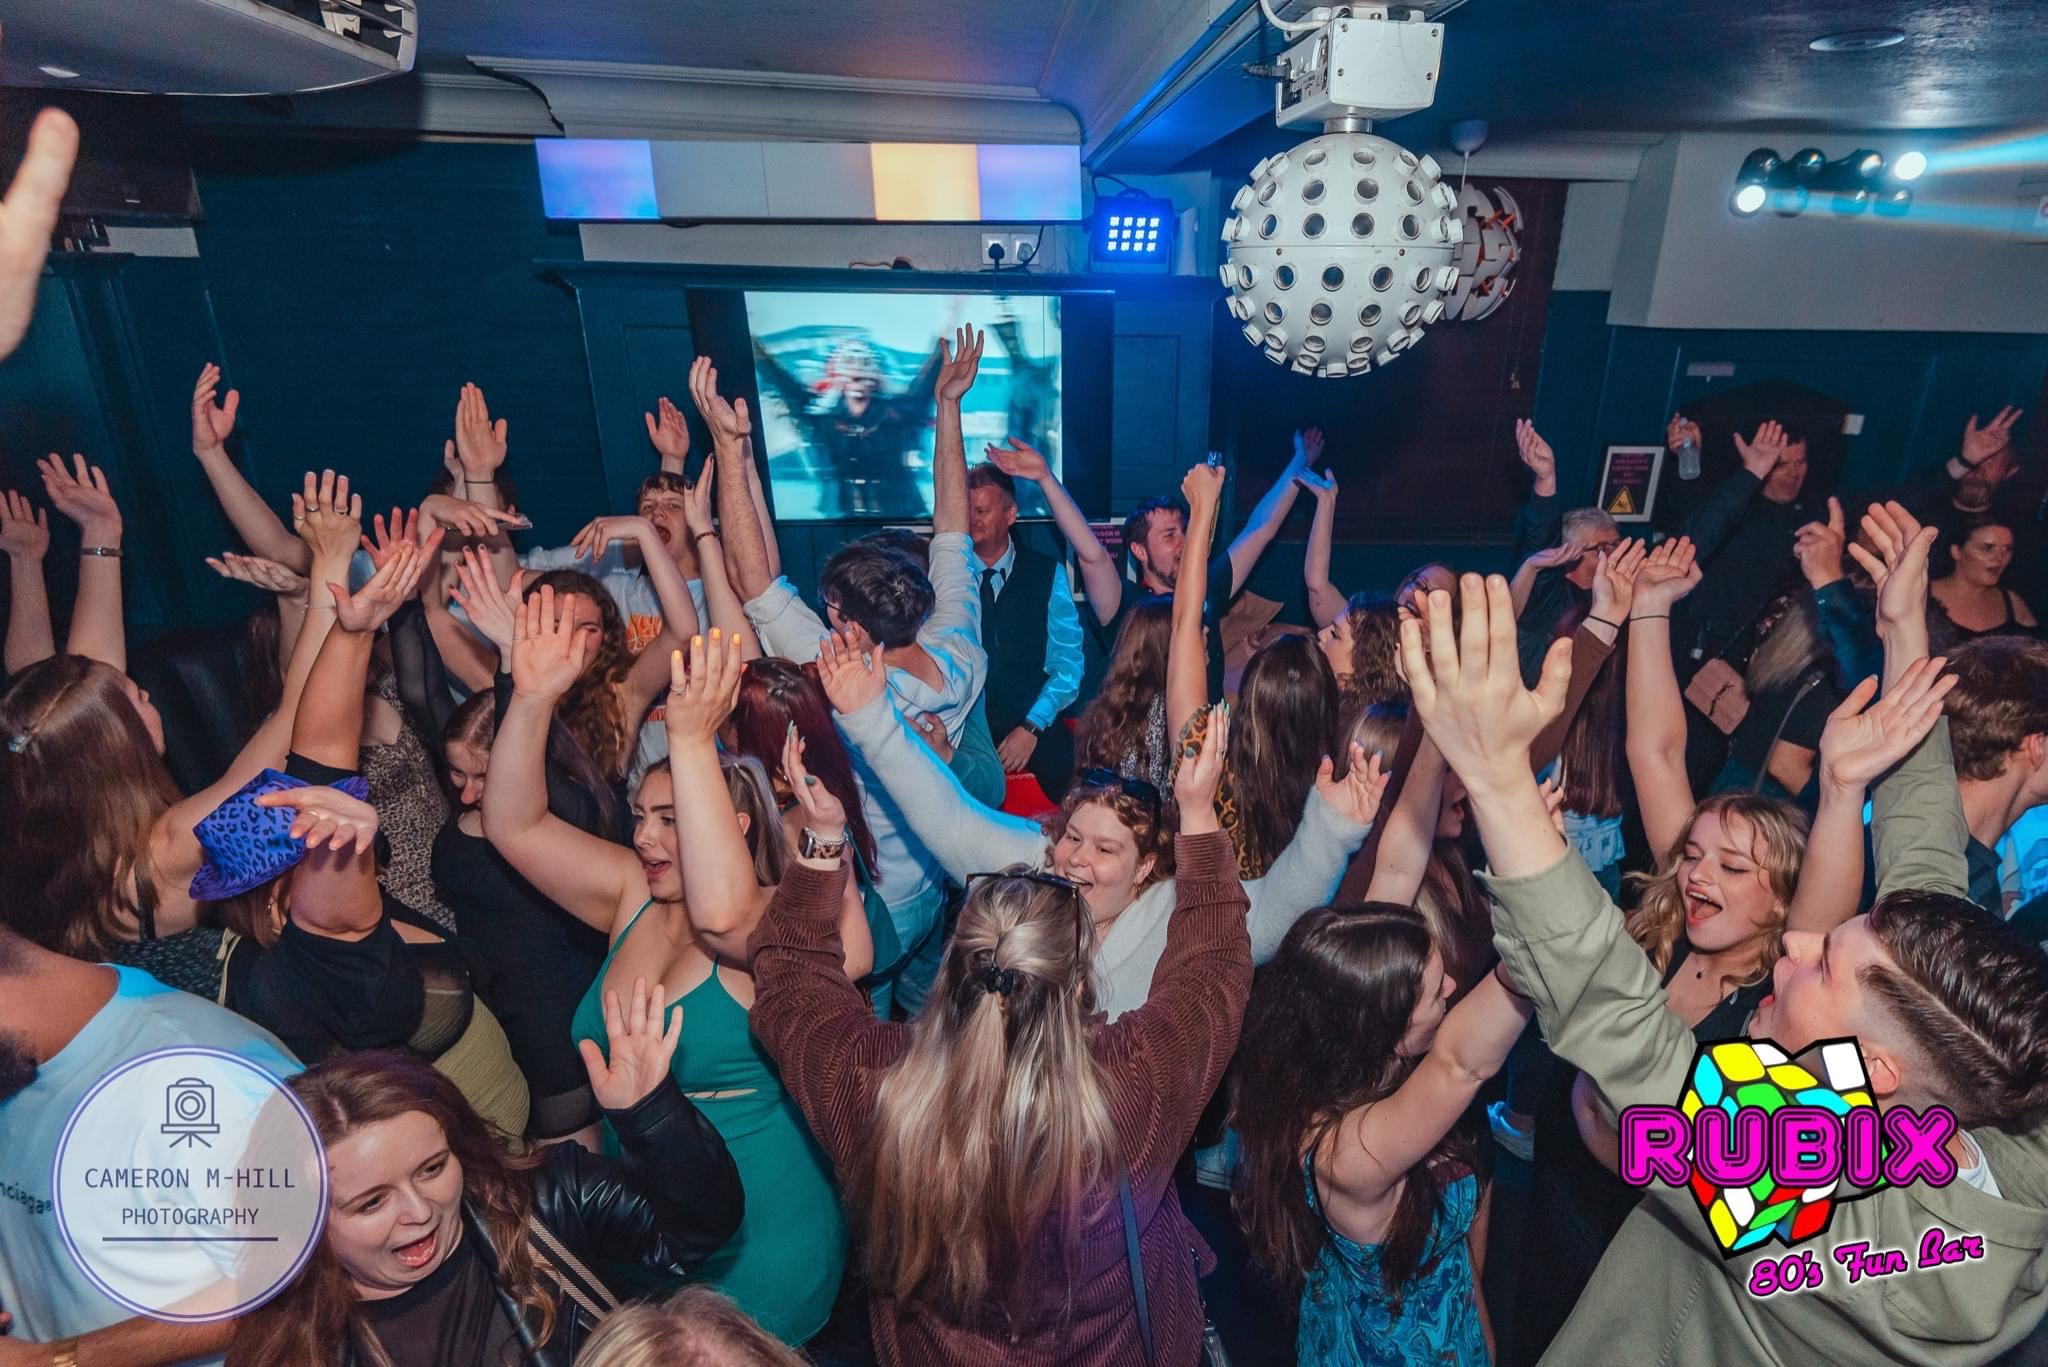 NIGHTLIFE | Photos from Yates Hereford, Hogarths, Play Nightclub, Rubix Bar and Left Bank Village – Are you in any?